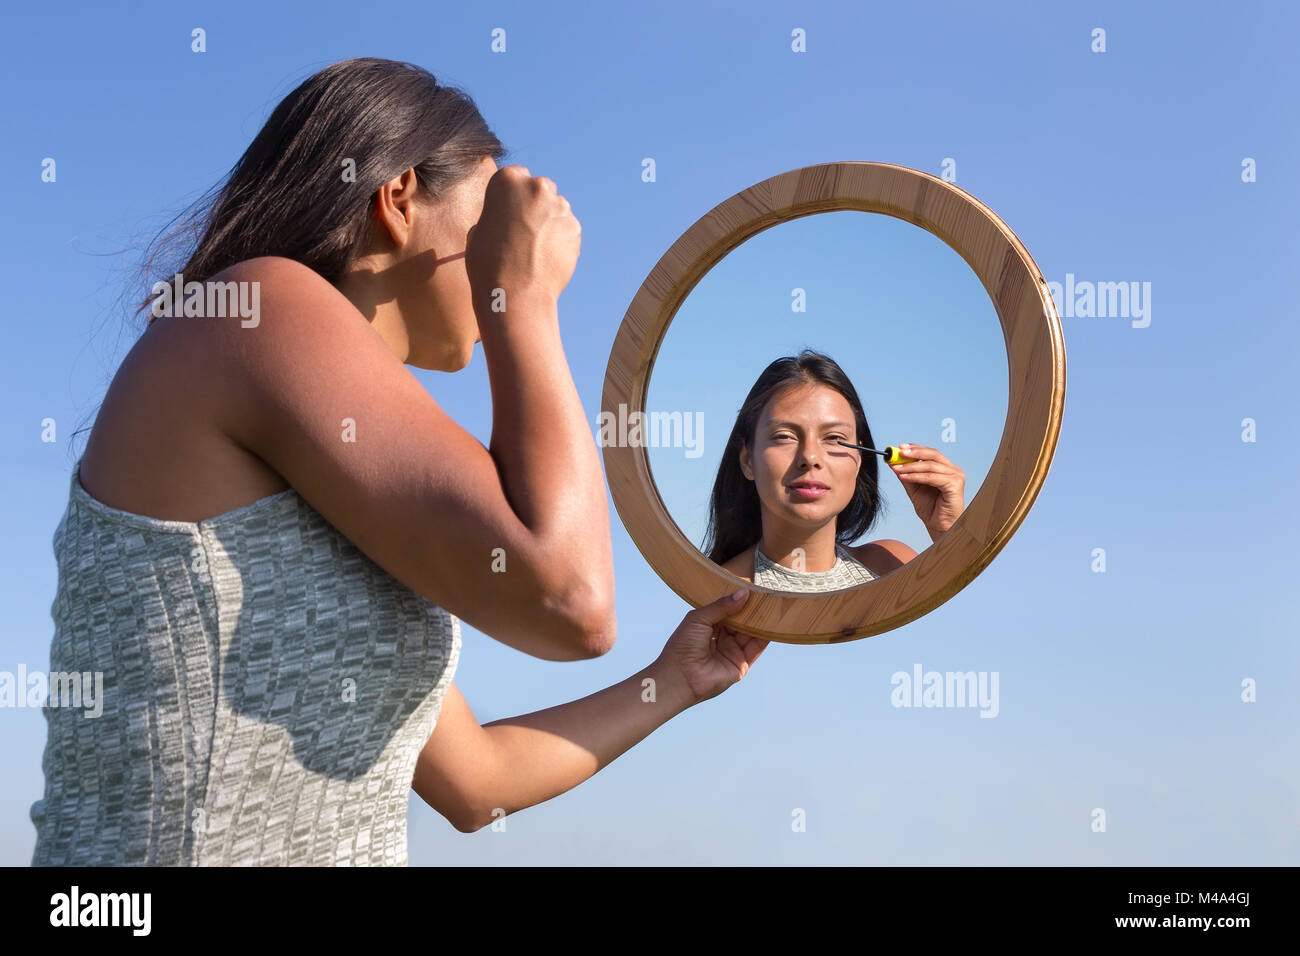 Woman applying mascara makeup in mirror with sky Stock Photo